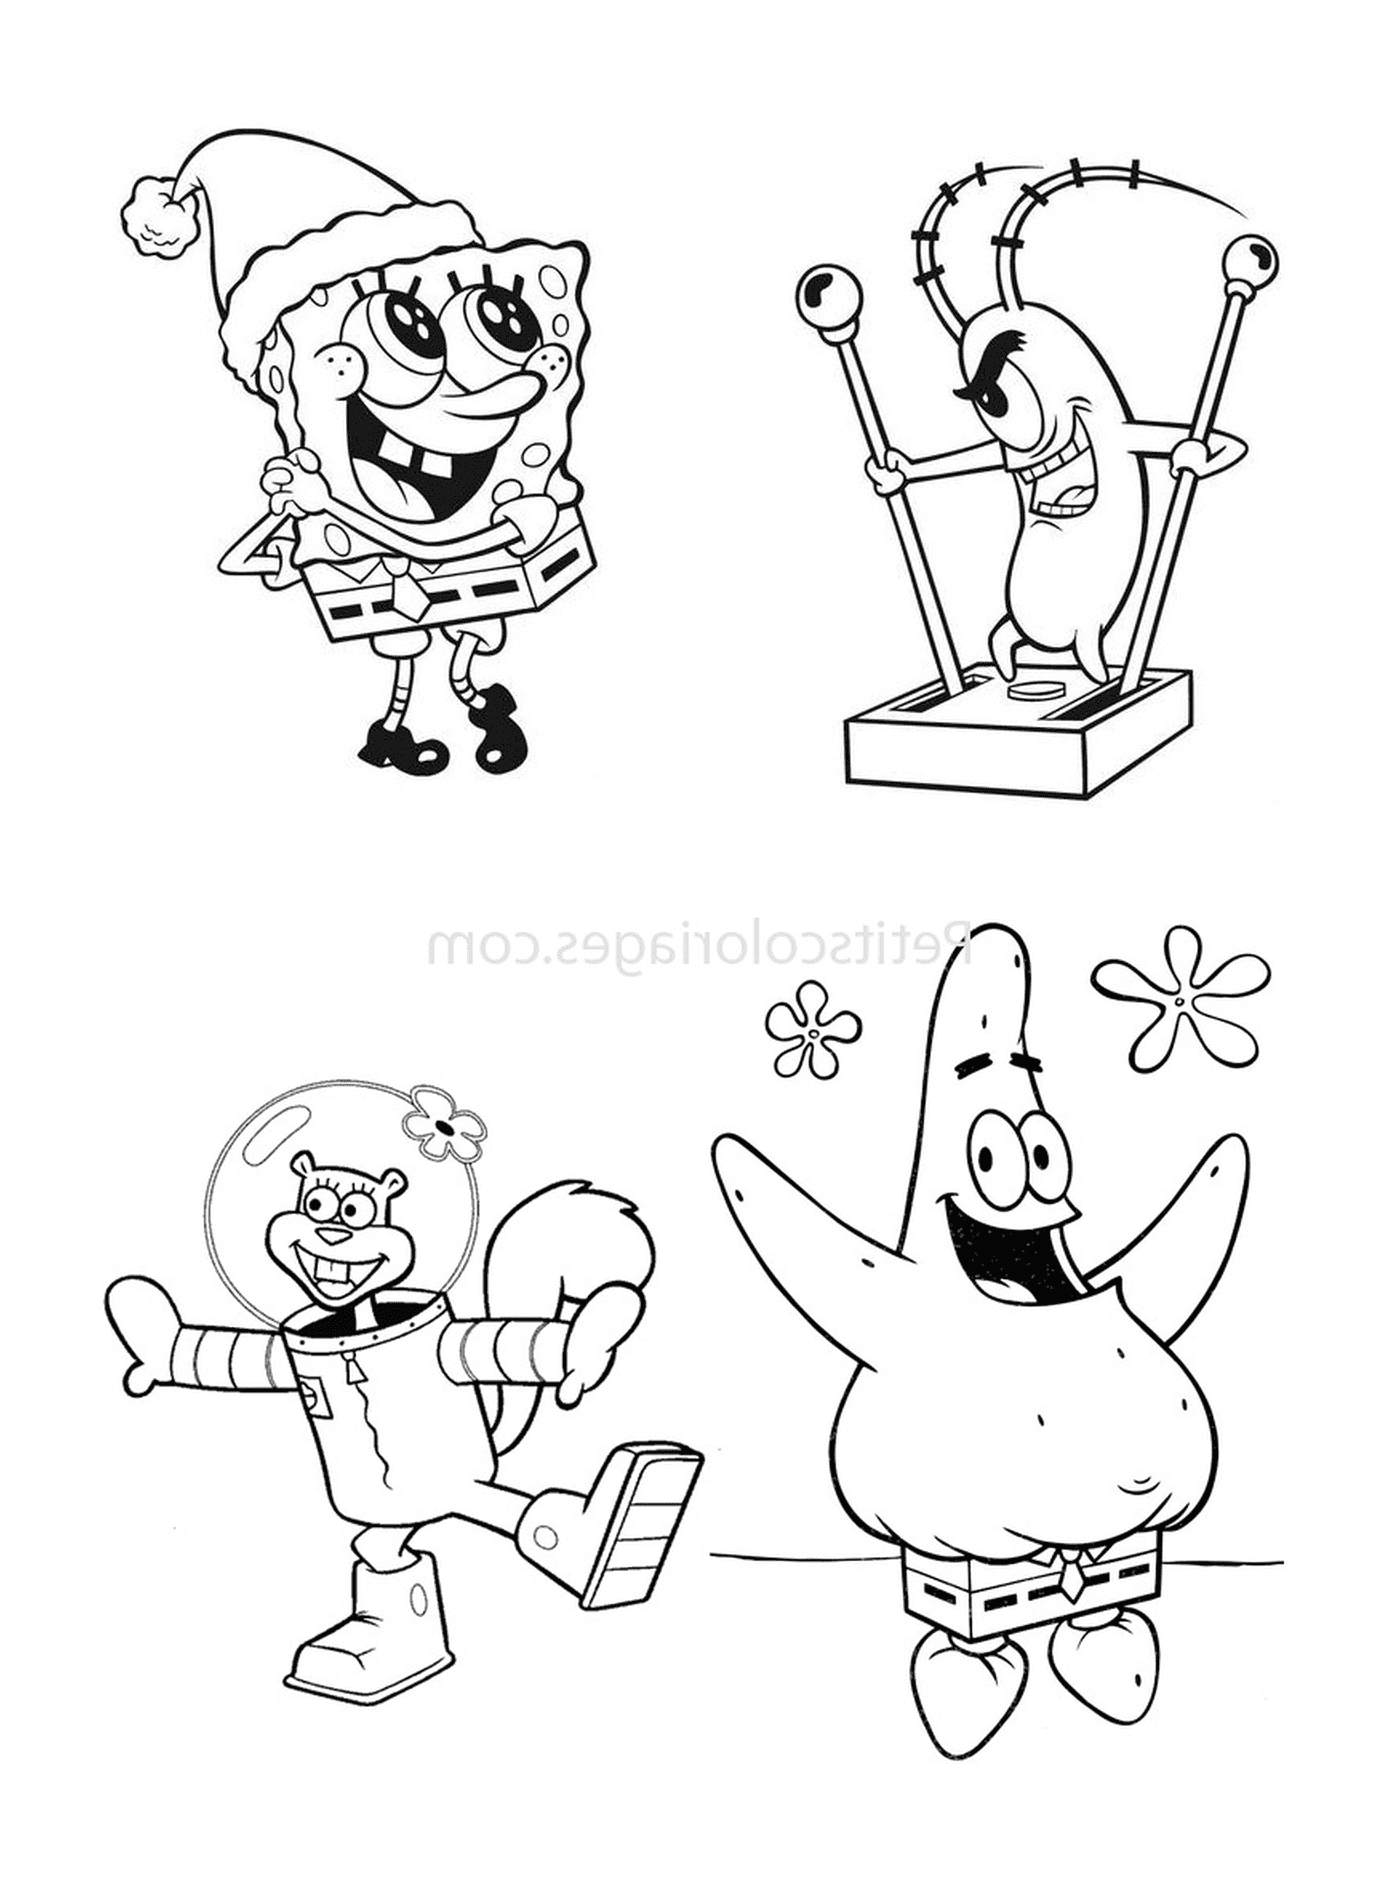  A set of four cartoon characters in black and white 